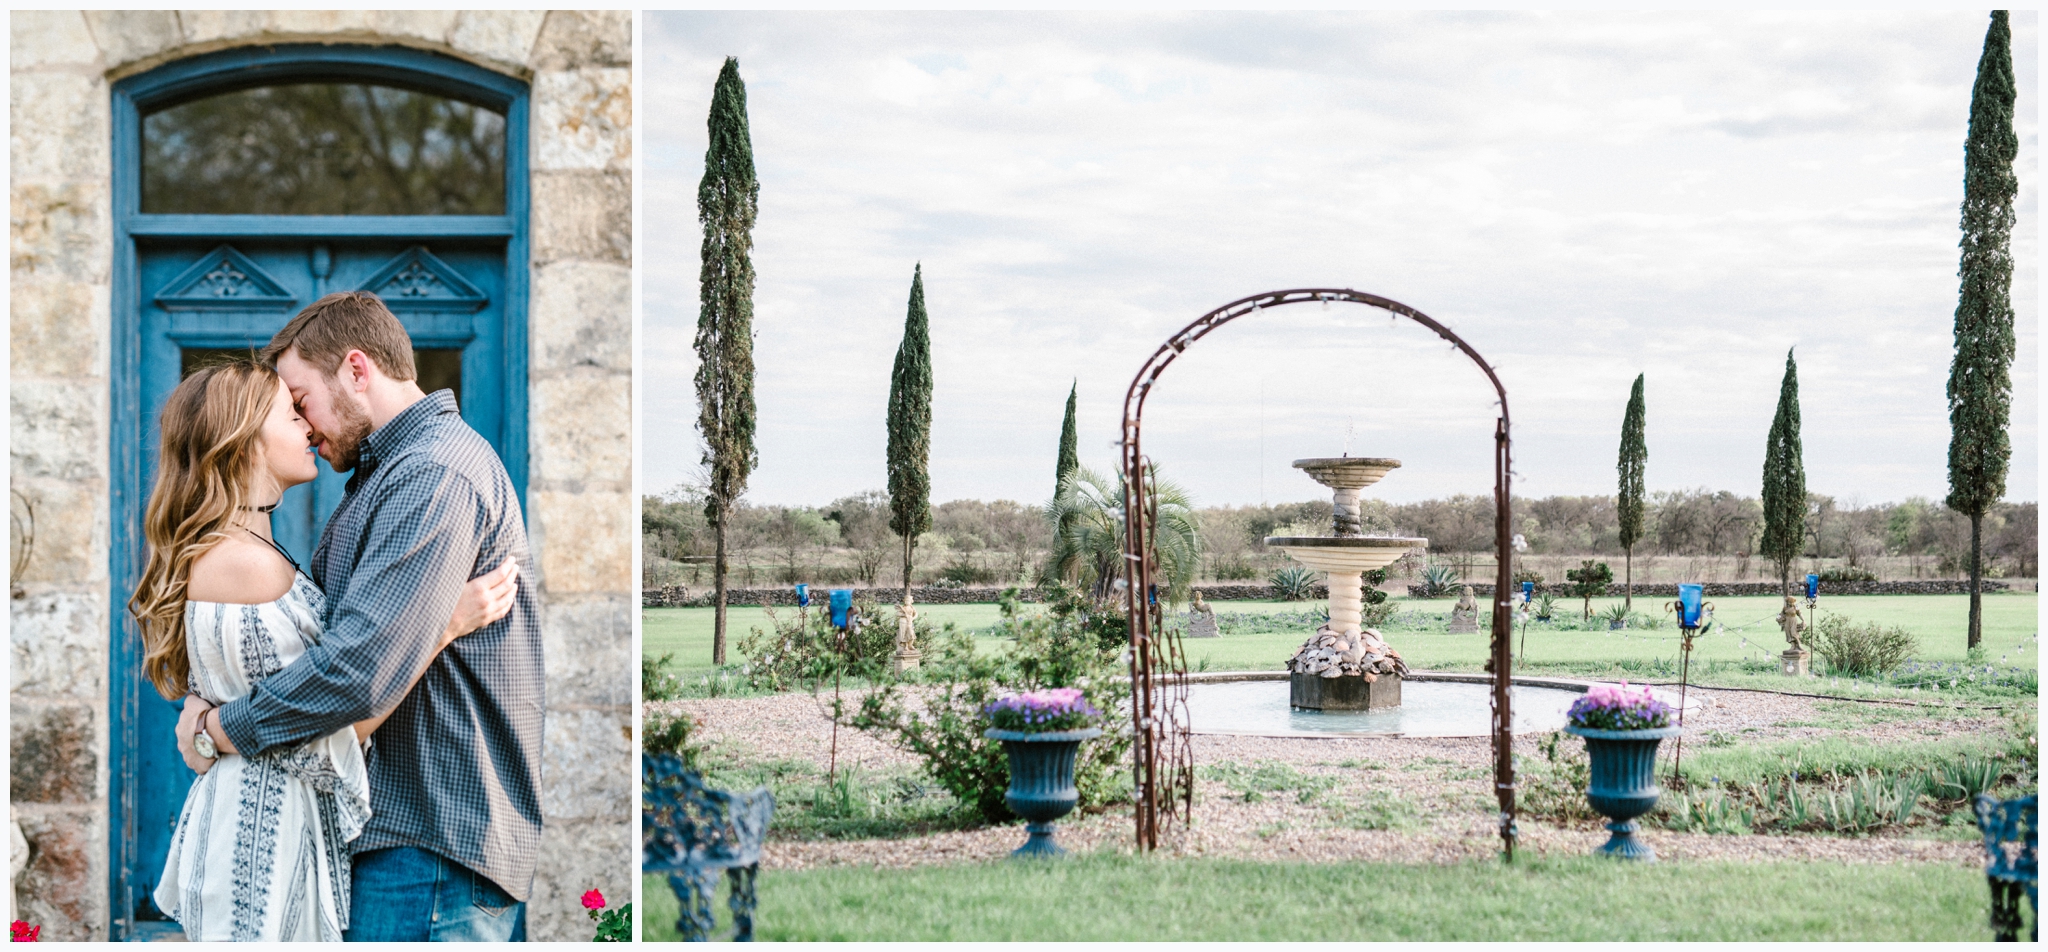 joslyn-holtfort-photography-engagement-session-le-san-michele-buda-texas_0005